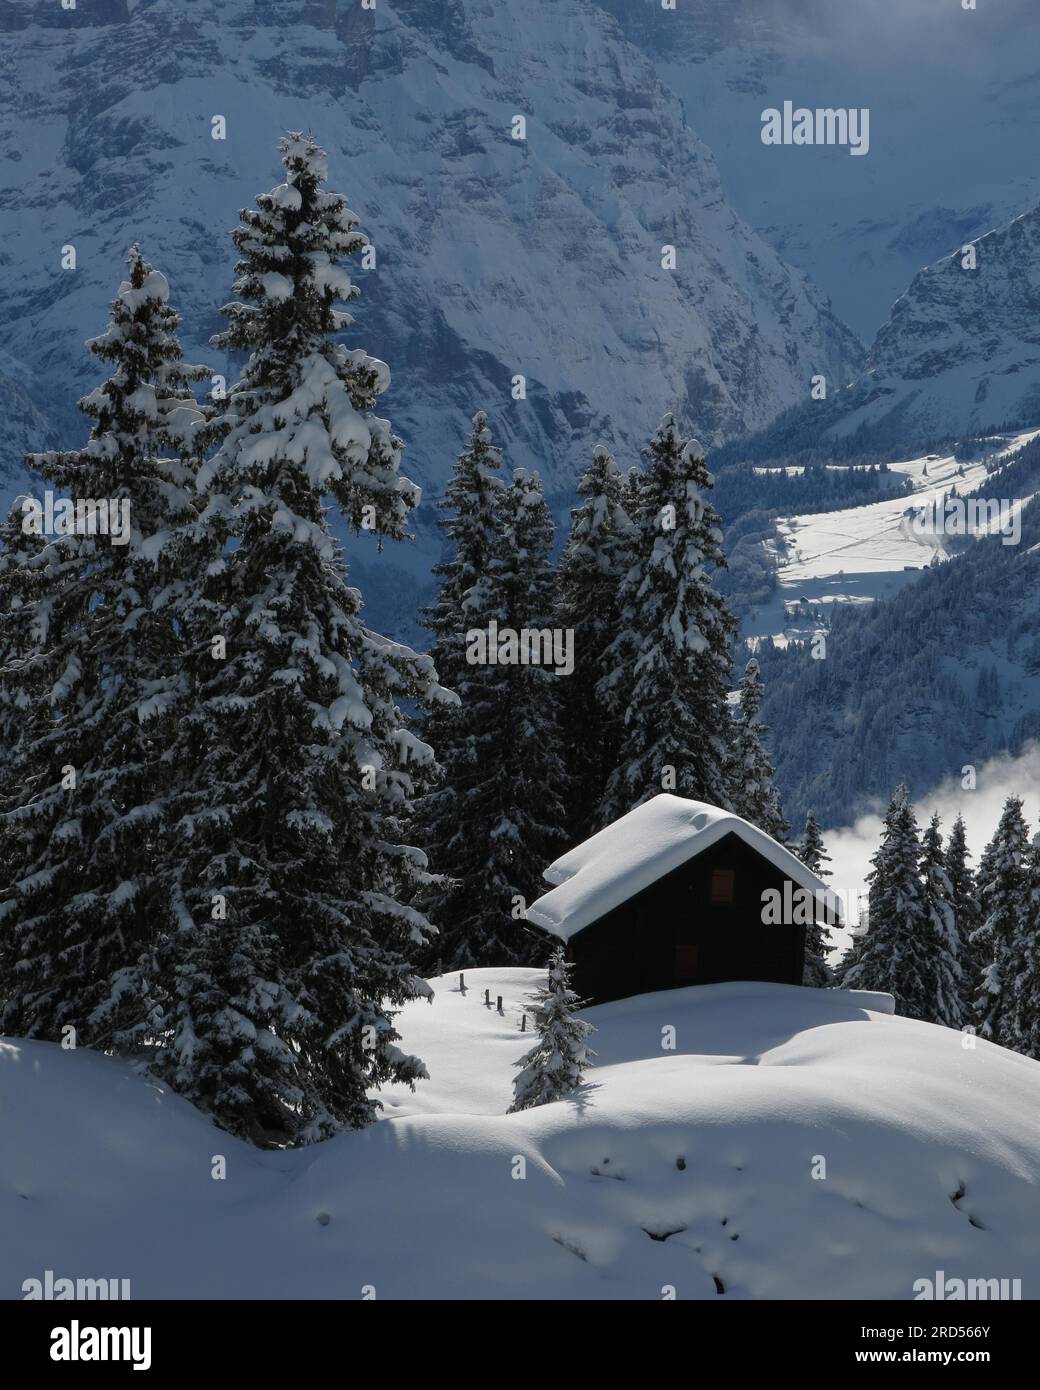 Winter scene in Braunwald, hut and forest Stock Photo